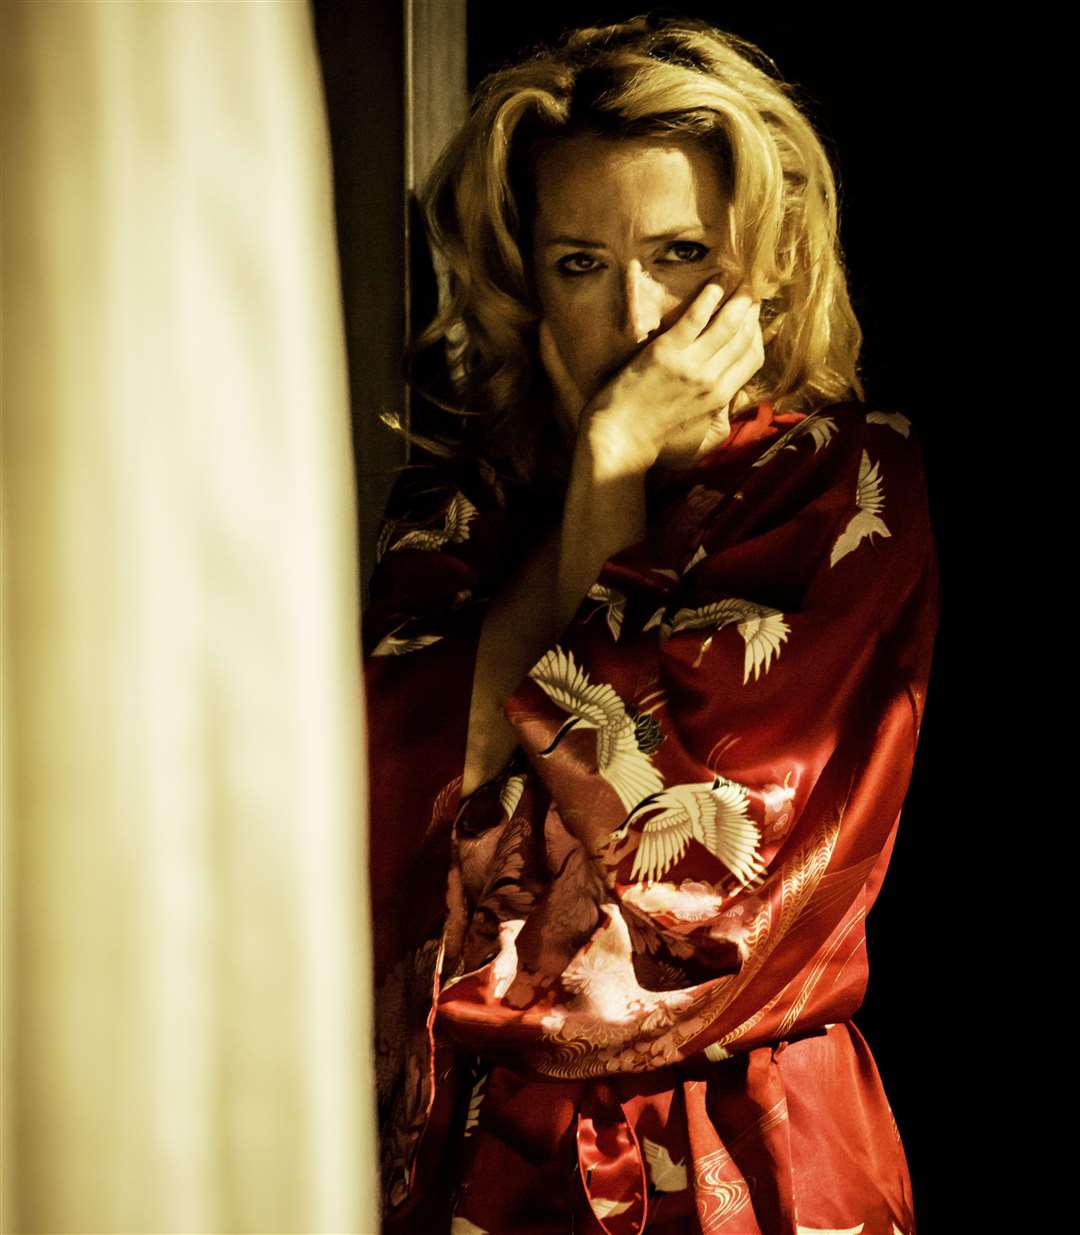 A Streetcar Named Desire by Williams, a Young Vic production starring Gillian Anderson Picture: Johan Persson/National Theatre